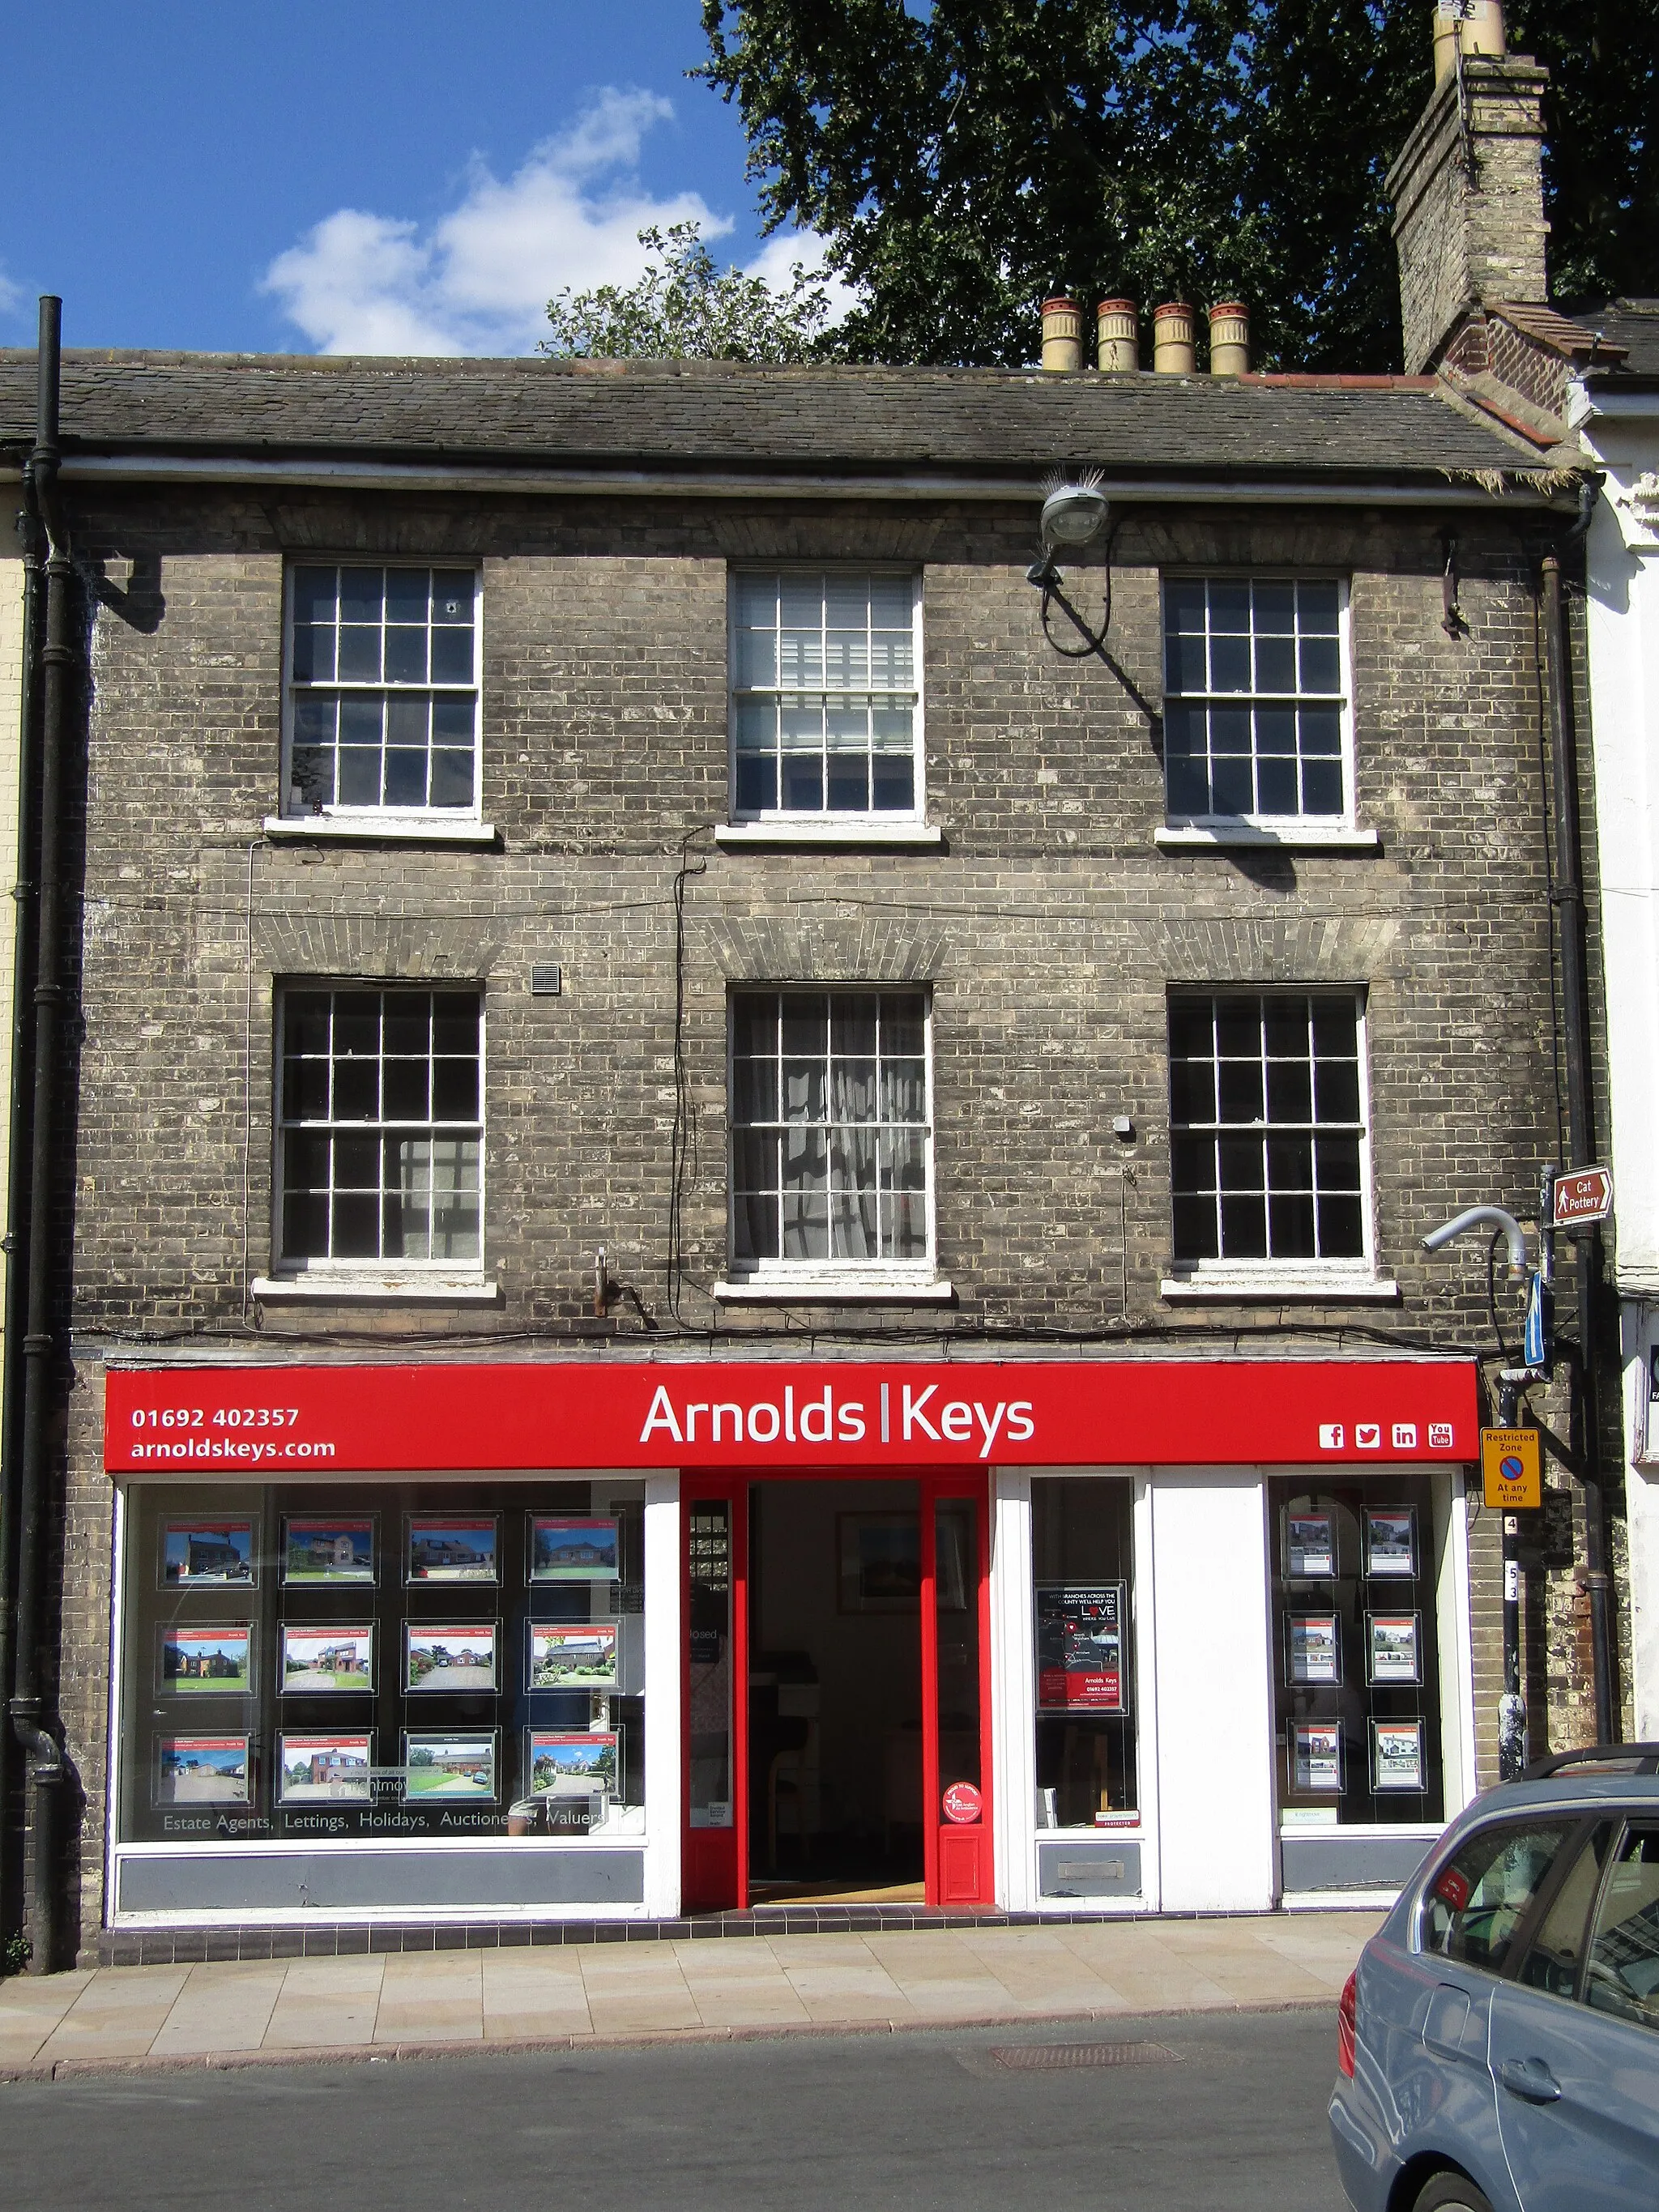 Photo showing: A branch of Arnolds Keys estate agents located on Market Place within the town of North Walsham, Norfolk, United Kingdom.